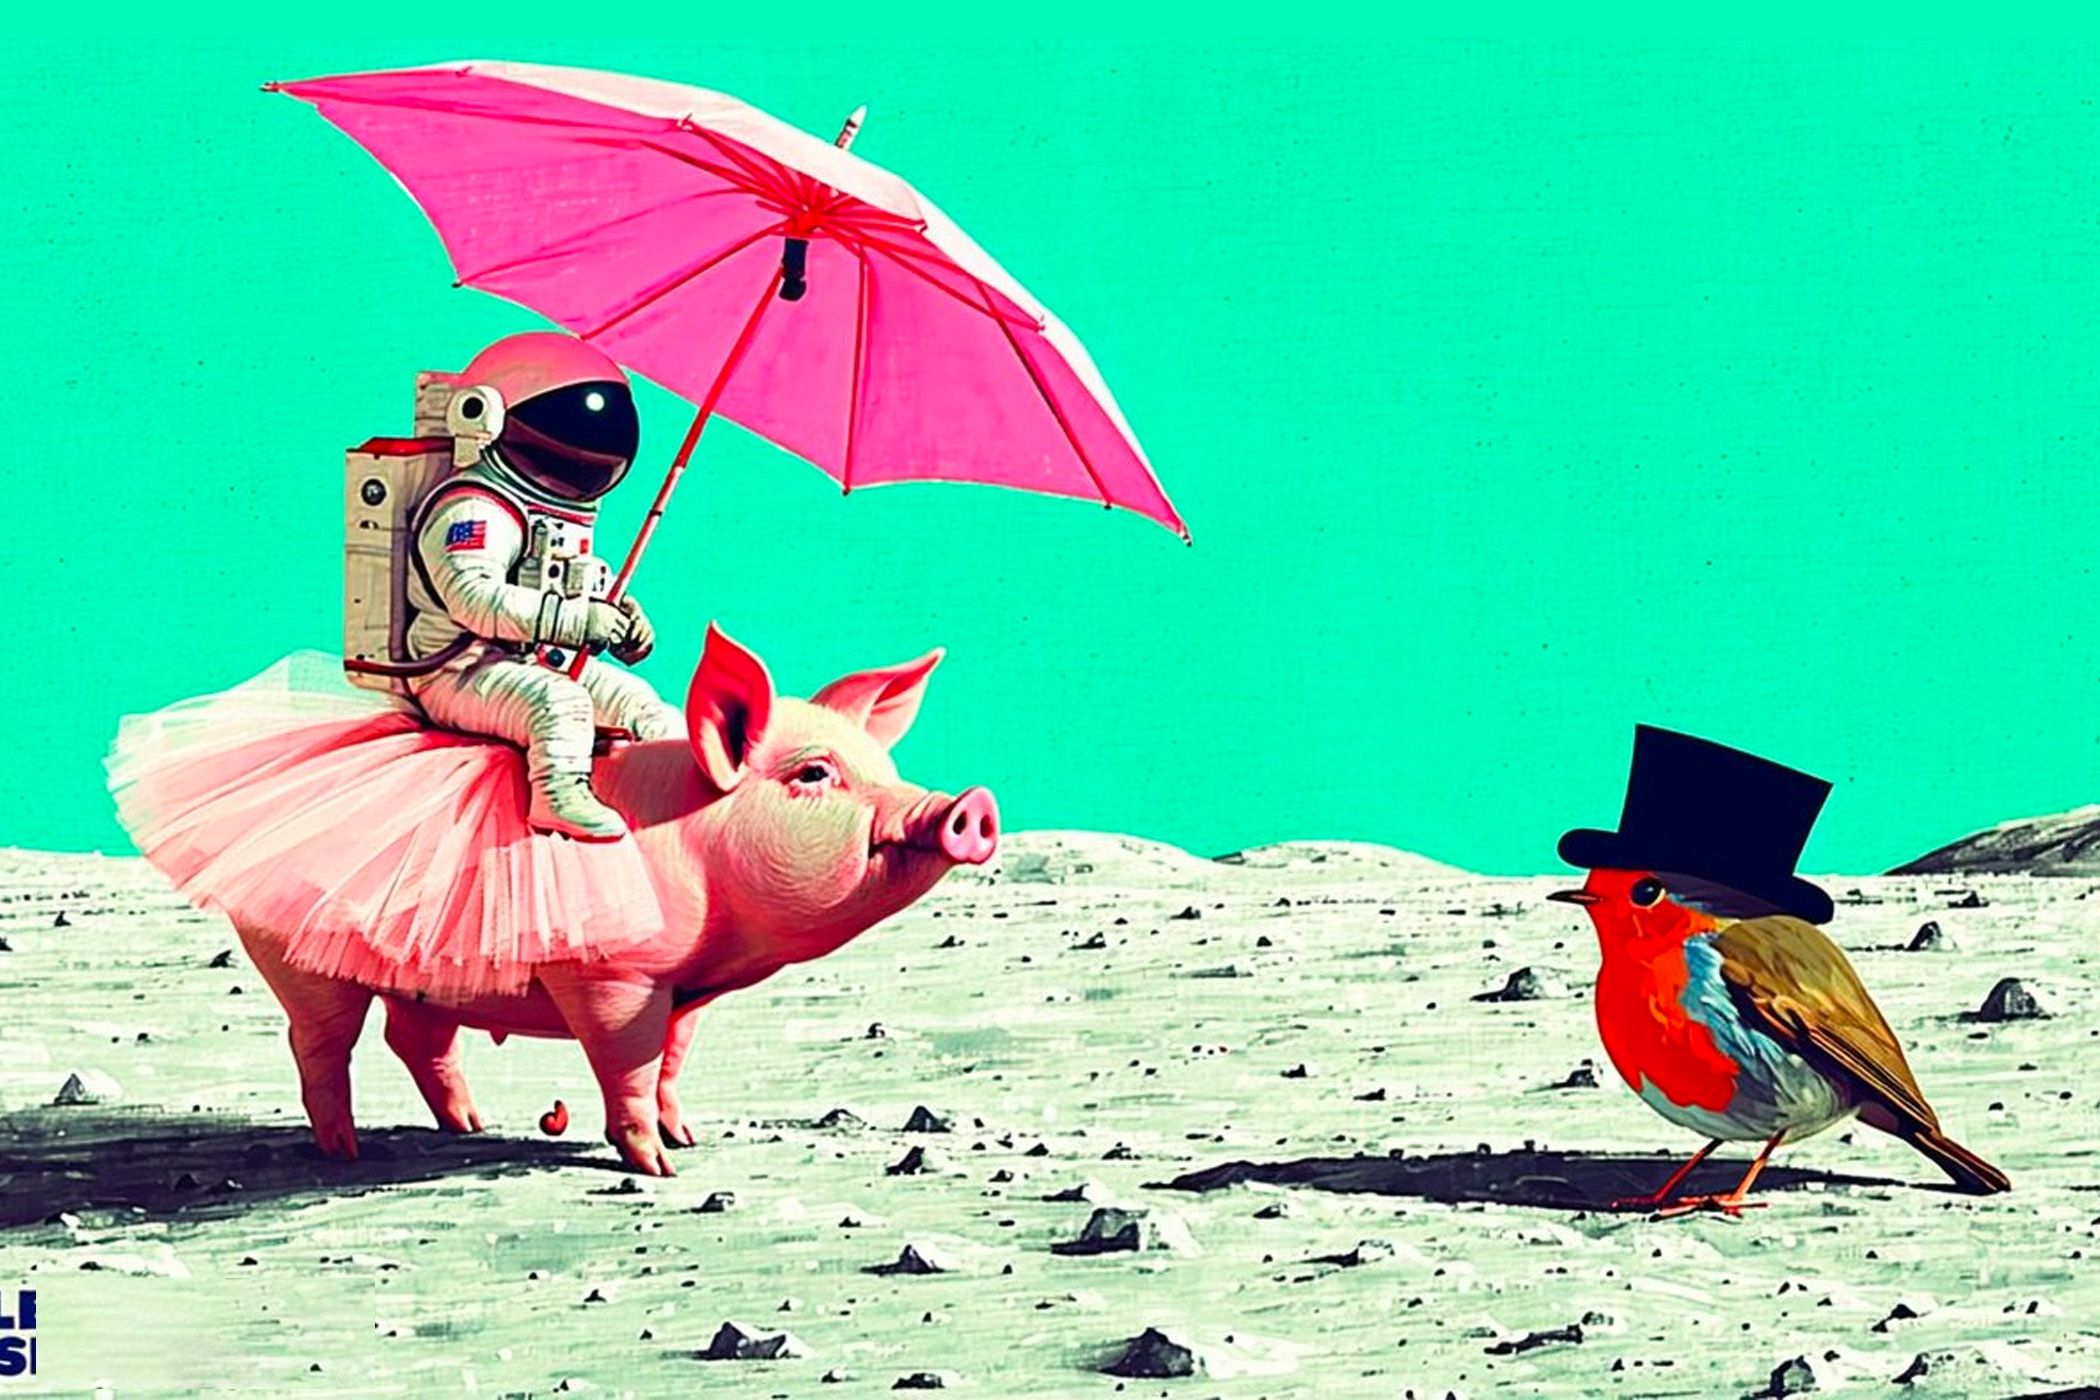 AI generated image of an astronaut holding an umbrella on a pig, looking at a bird with a top hat.